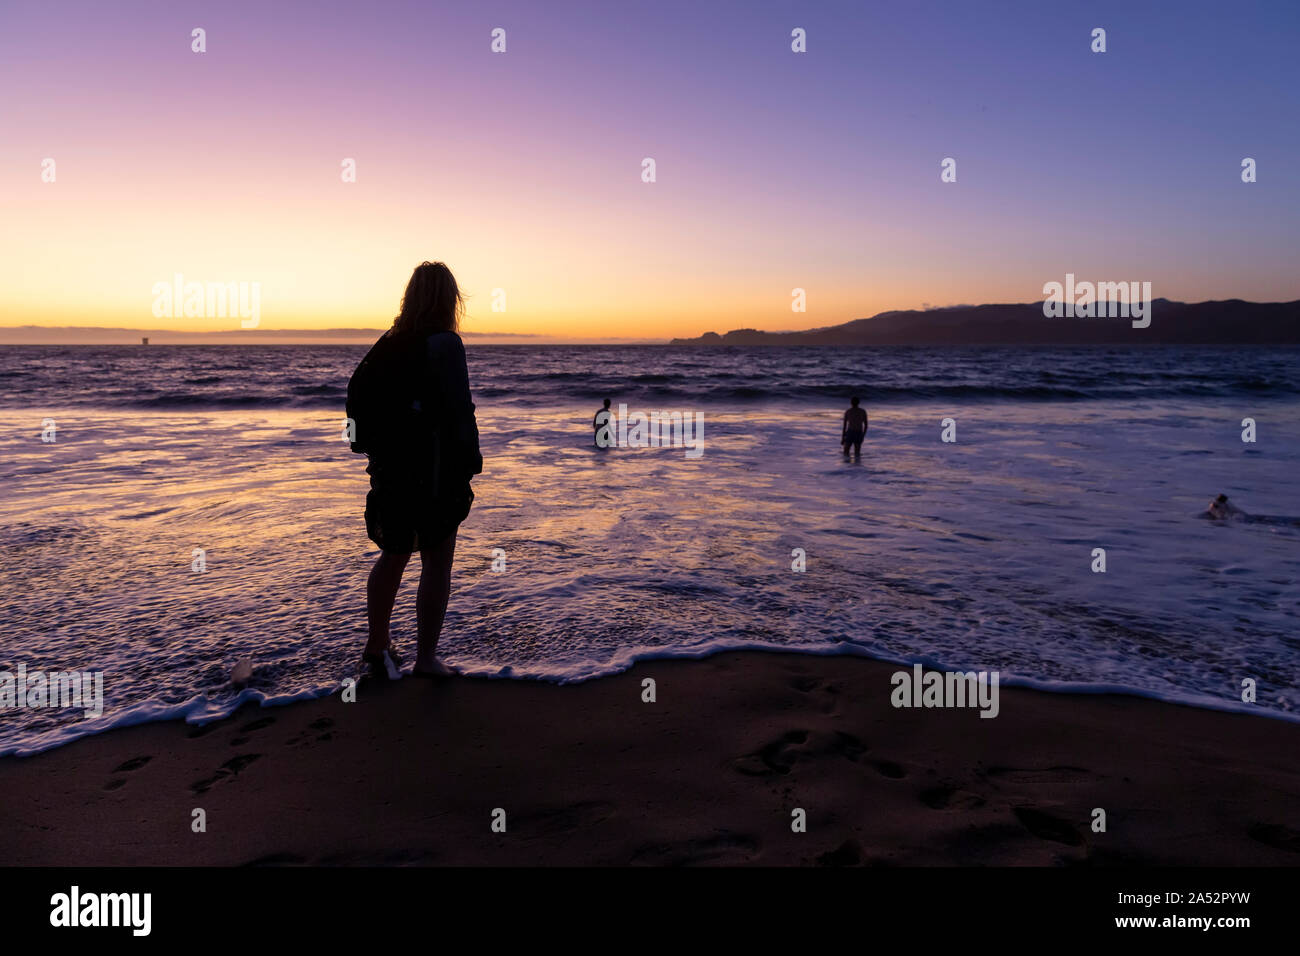 Silhouette of a woman paddling on Baker Beach, San Francisco at sunset Stock Photo